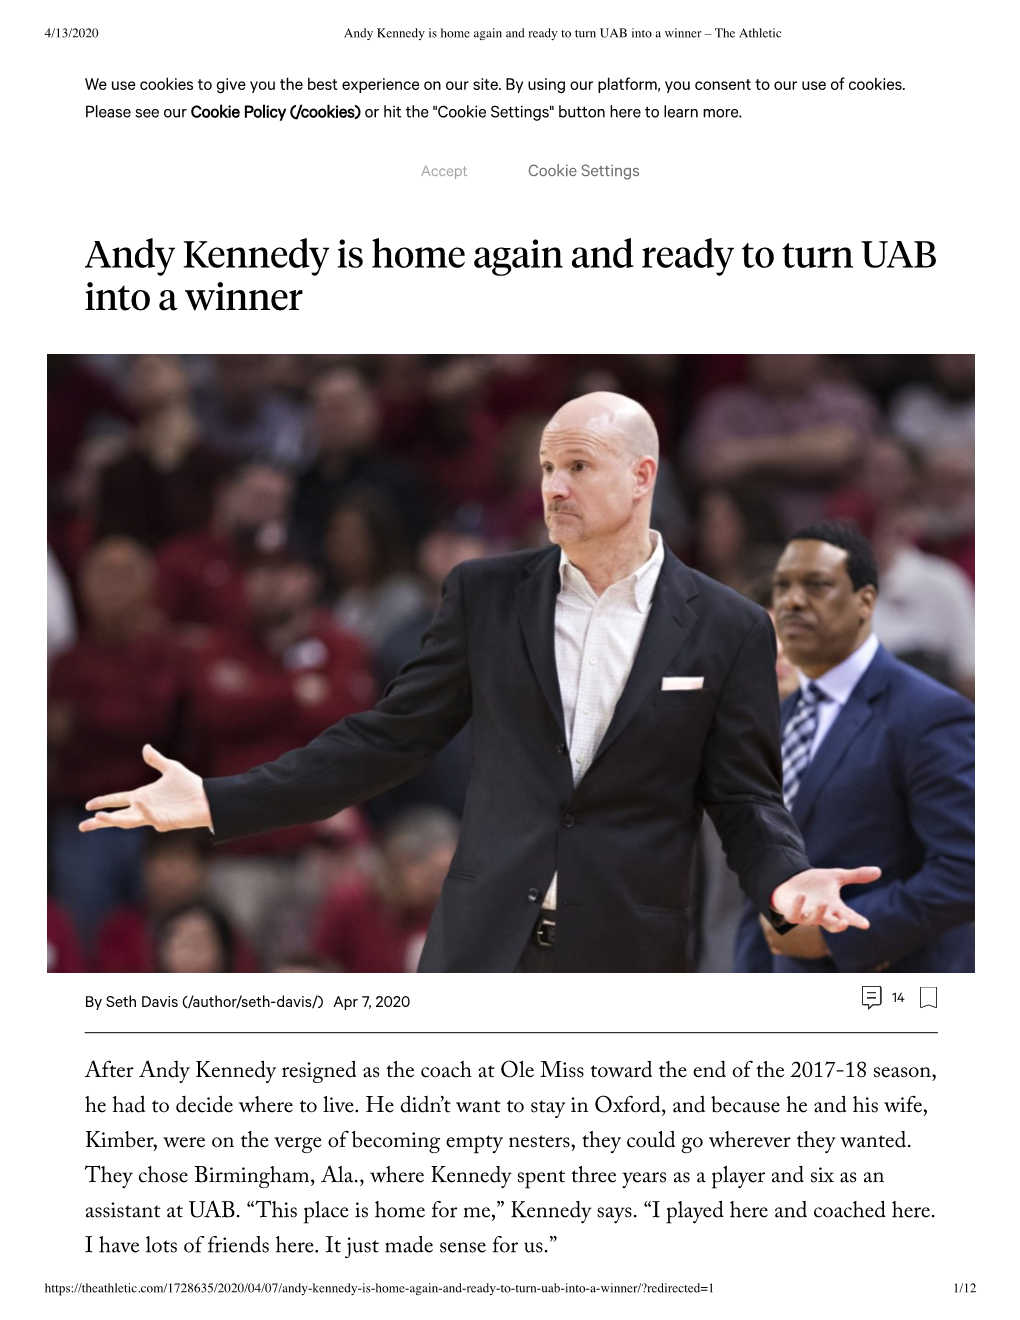 Andy Kennedy Is Home Again and Ready to Turn UAB Into a Winner – the Athletic